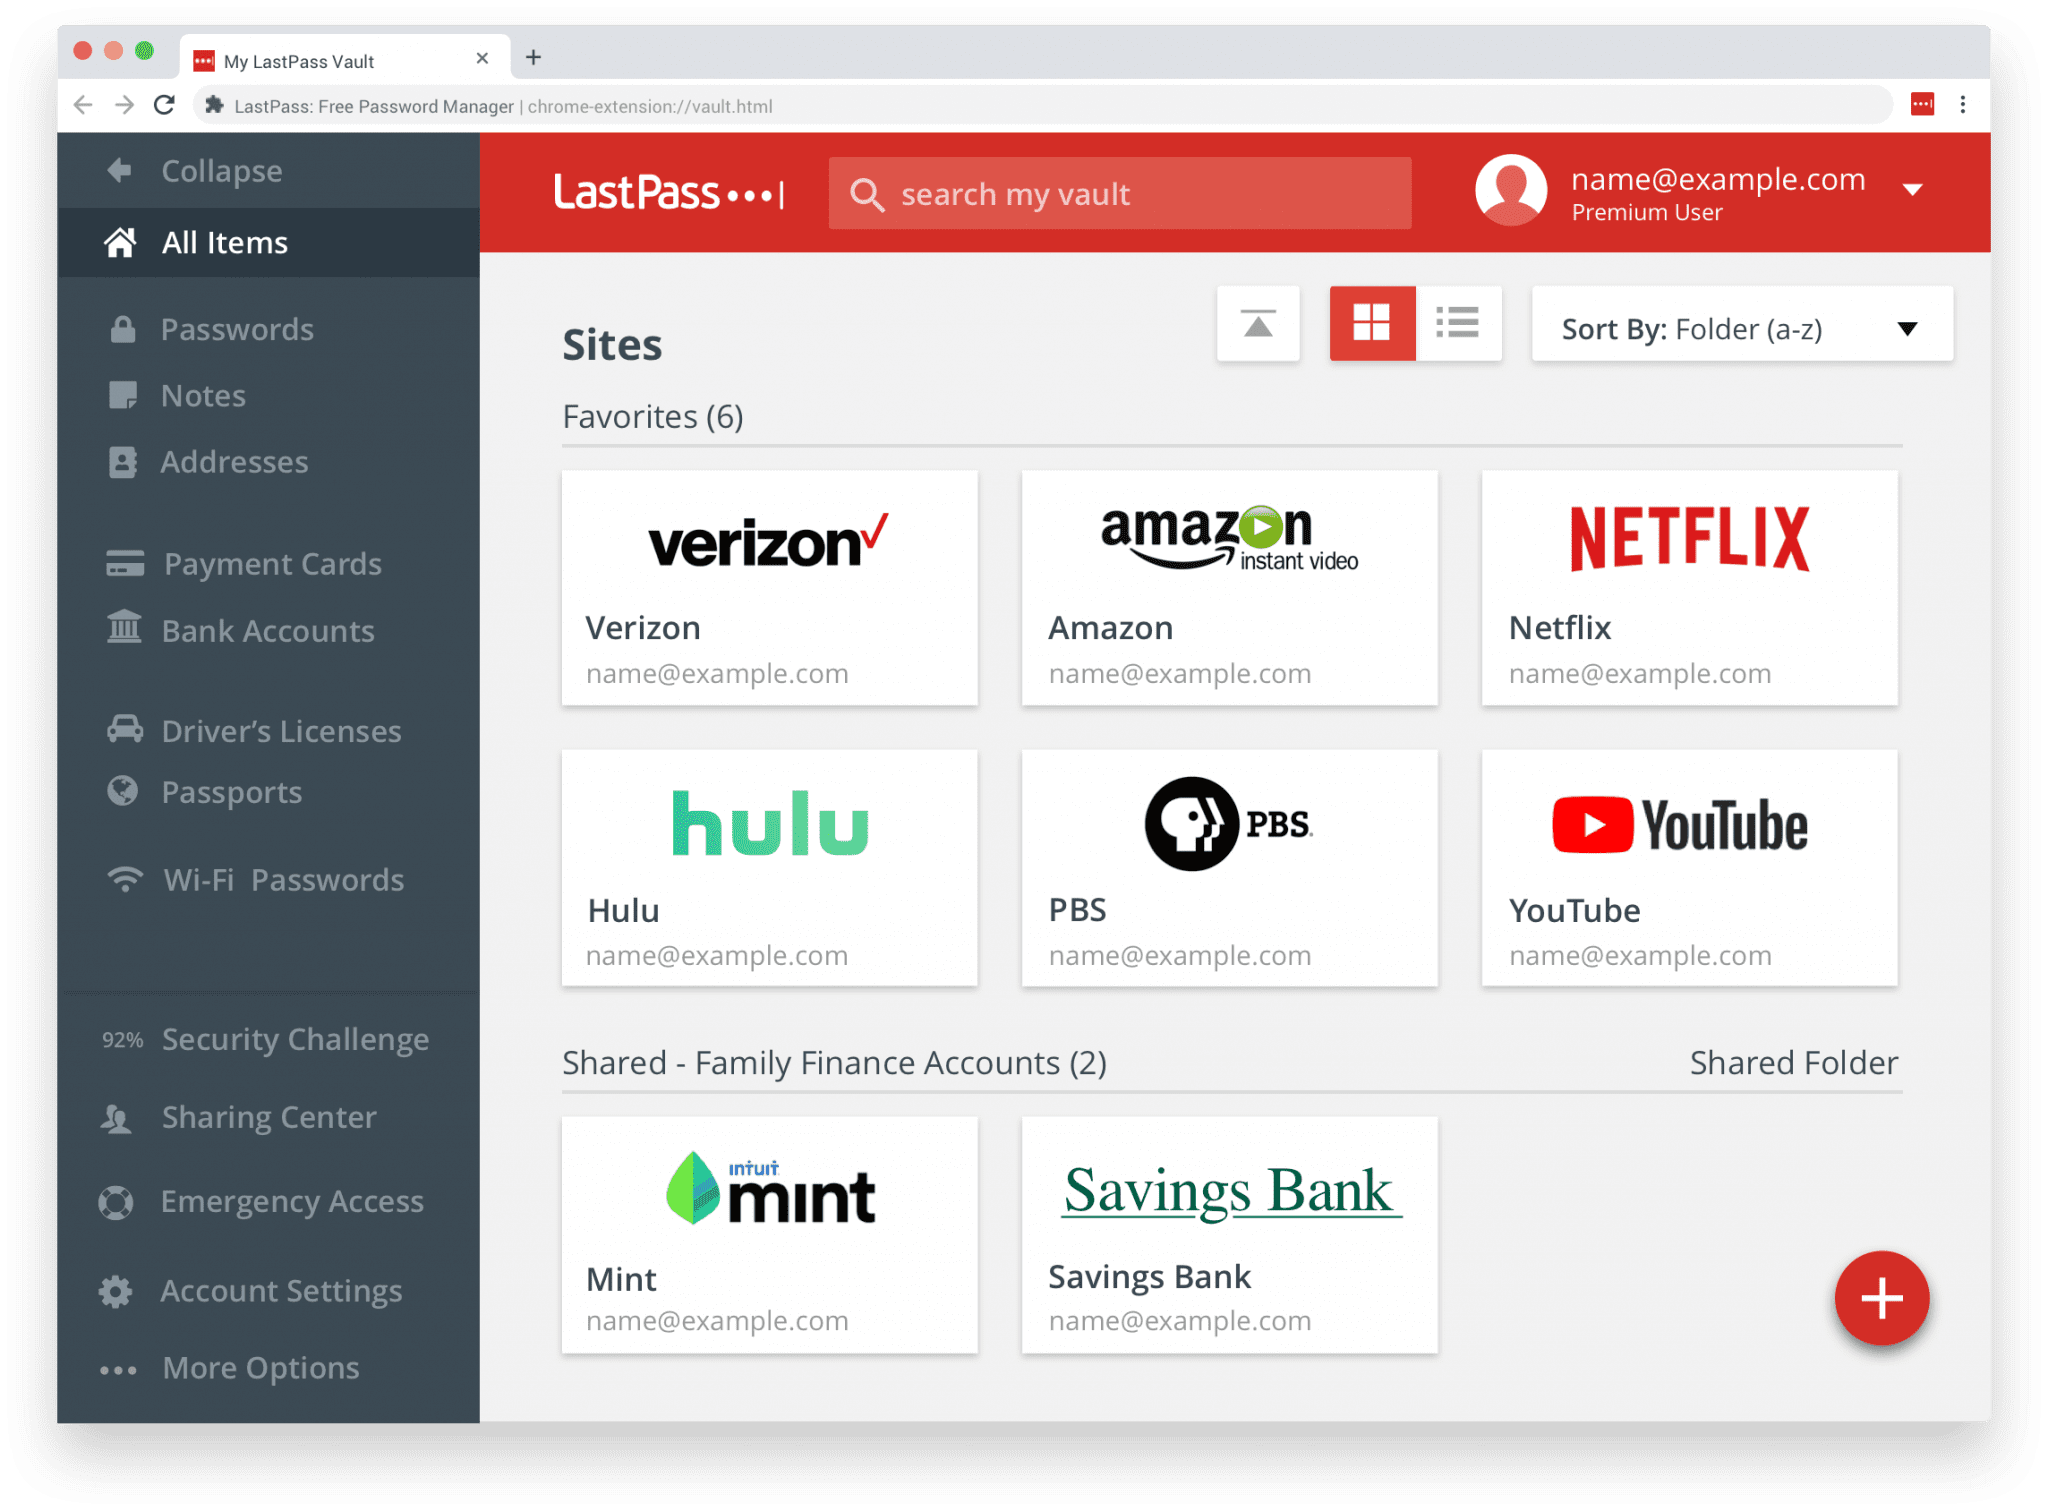 mobile browsers with lastpass support